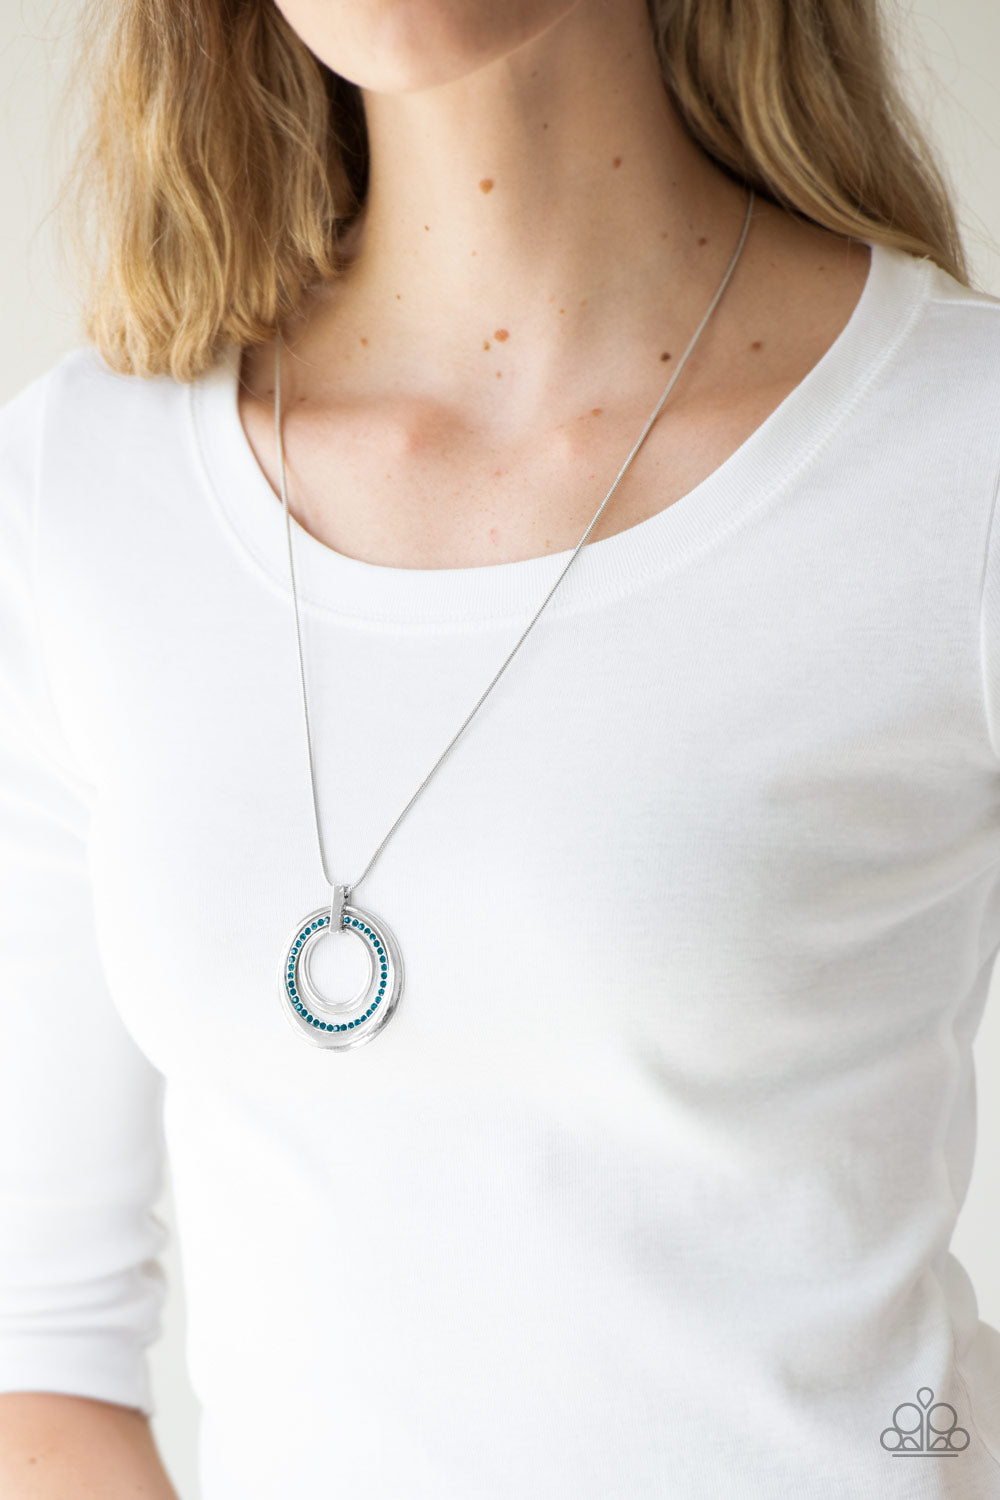 Paparazzi - Full Frontier - Long Turquoise Blue Necklace | Fashion Fabulous  Jewelry